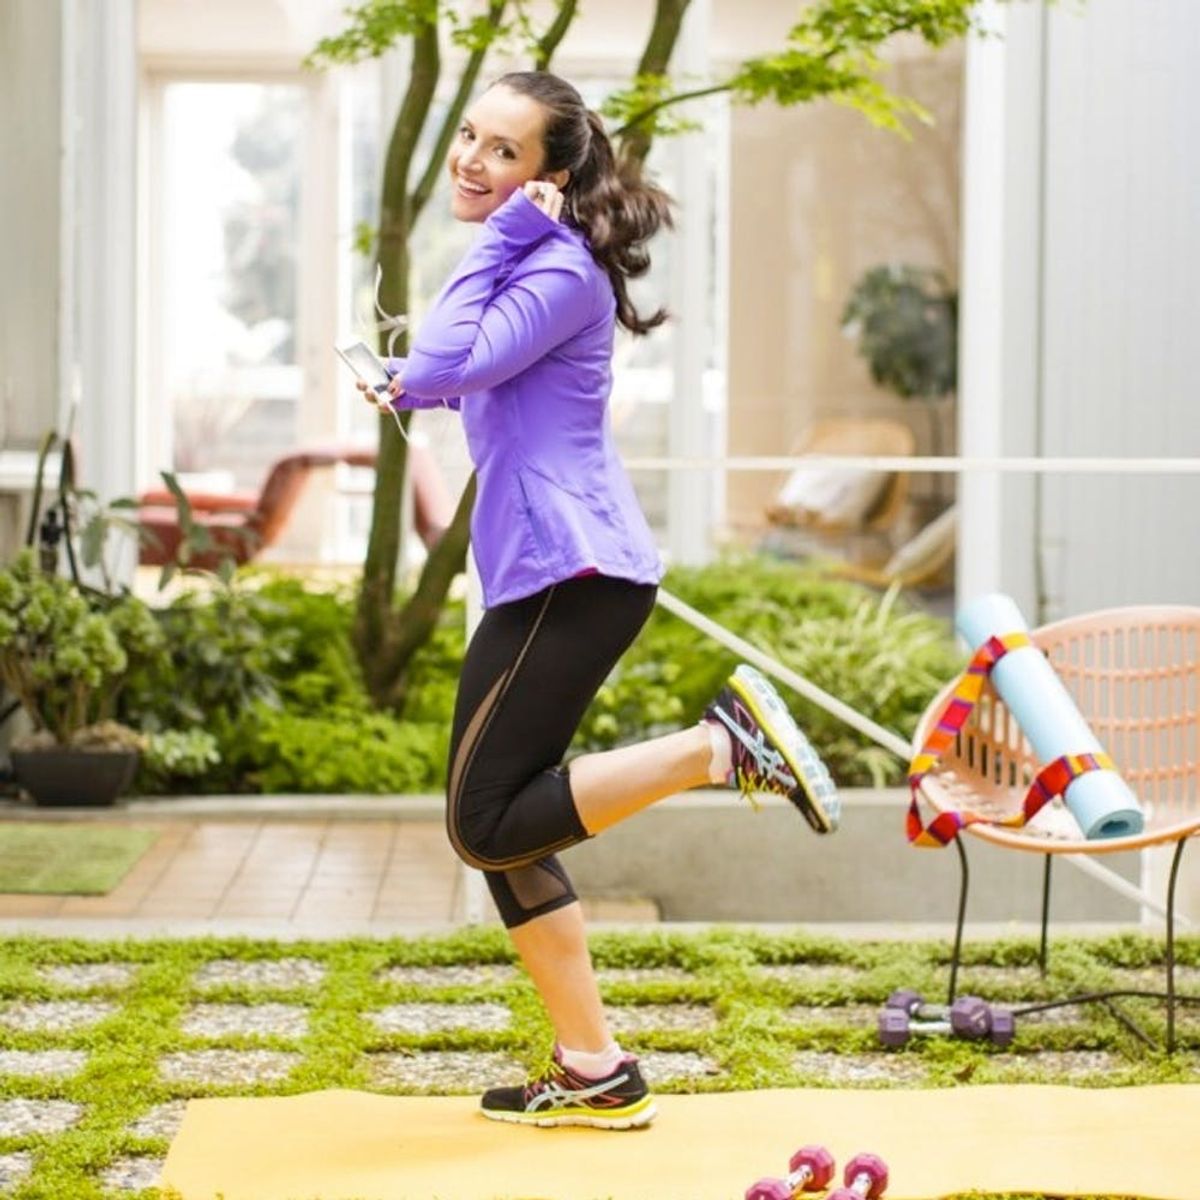 New Moms! Here’s the 12 Week Guide to Exercise After Baby